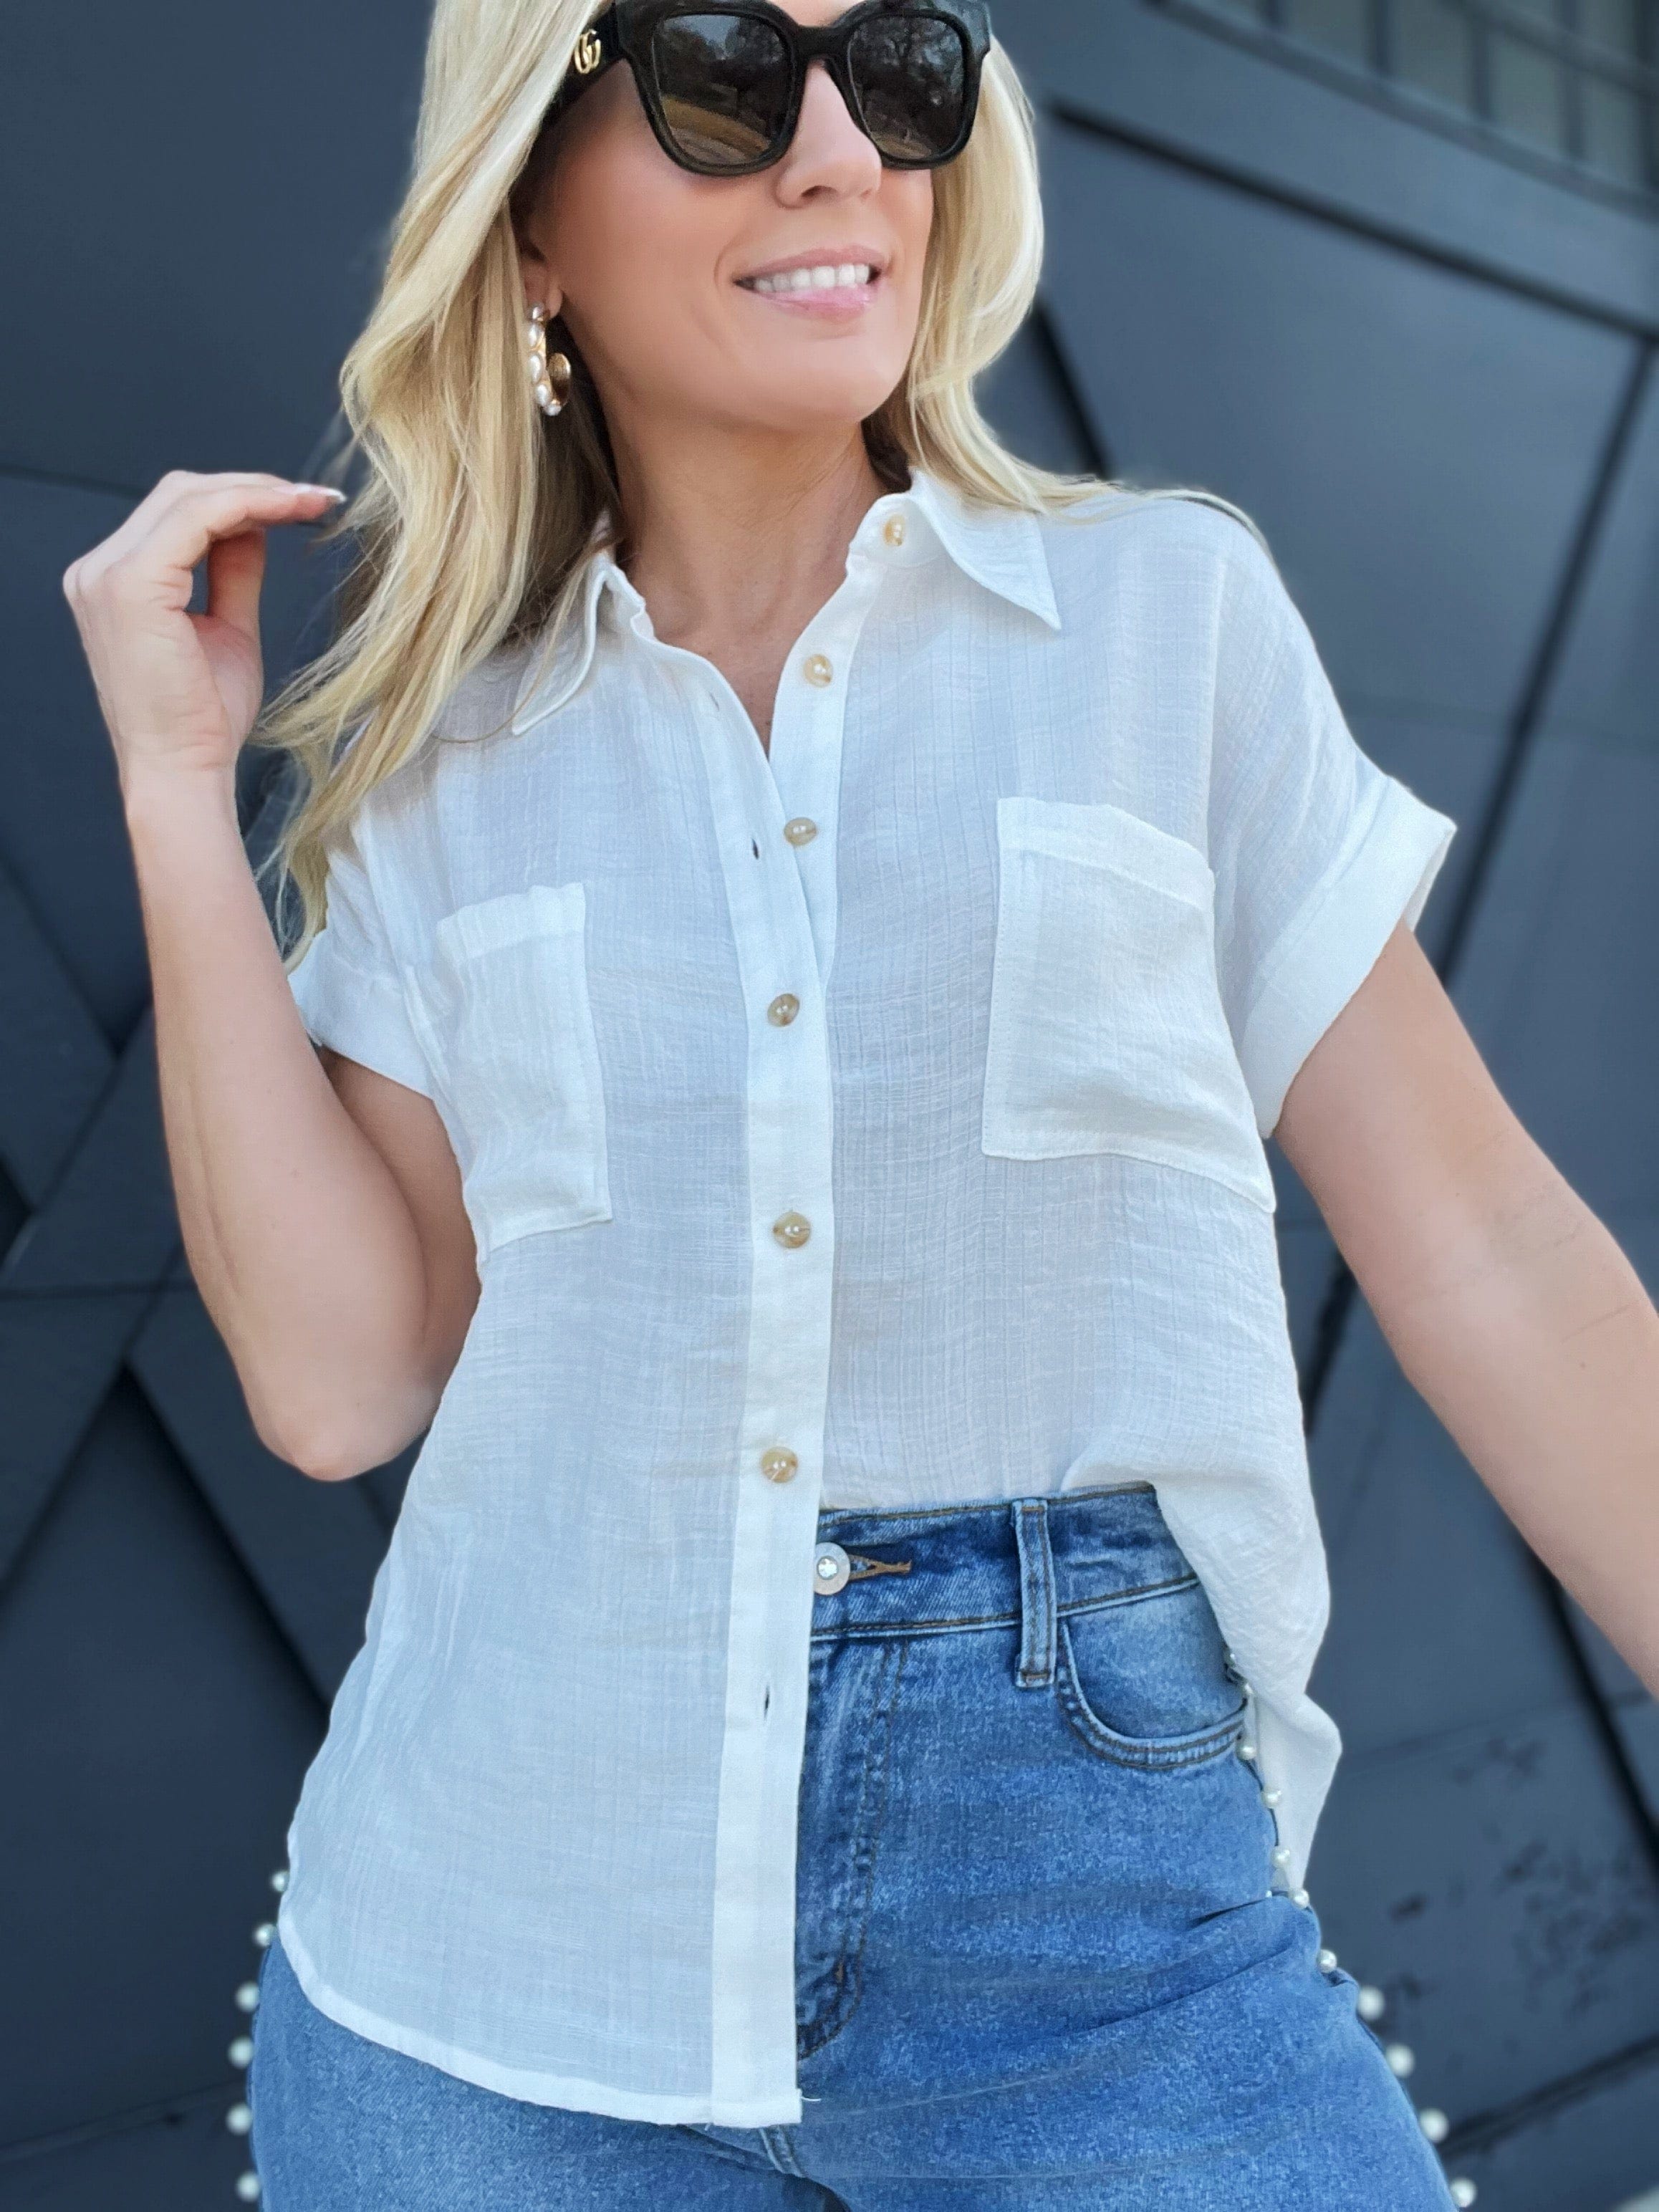 Solid Fold Sleeve Button Down In White - Infinity Raine